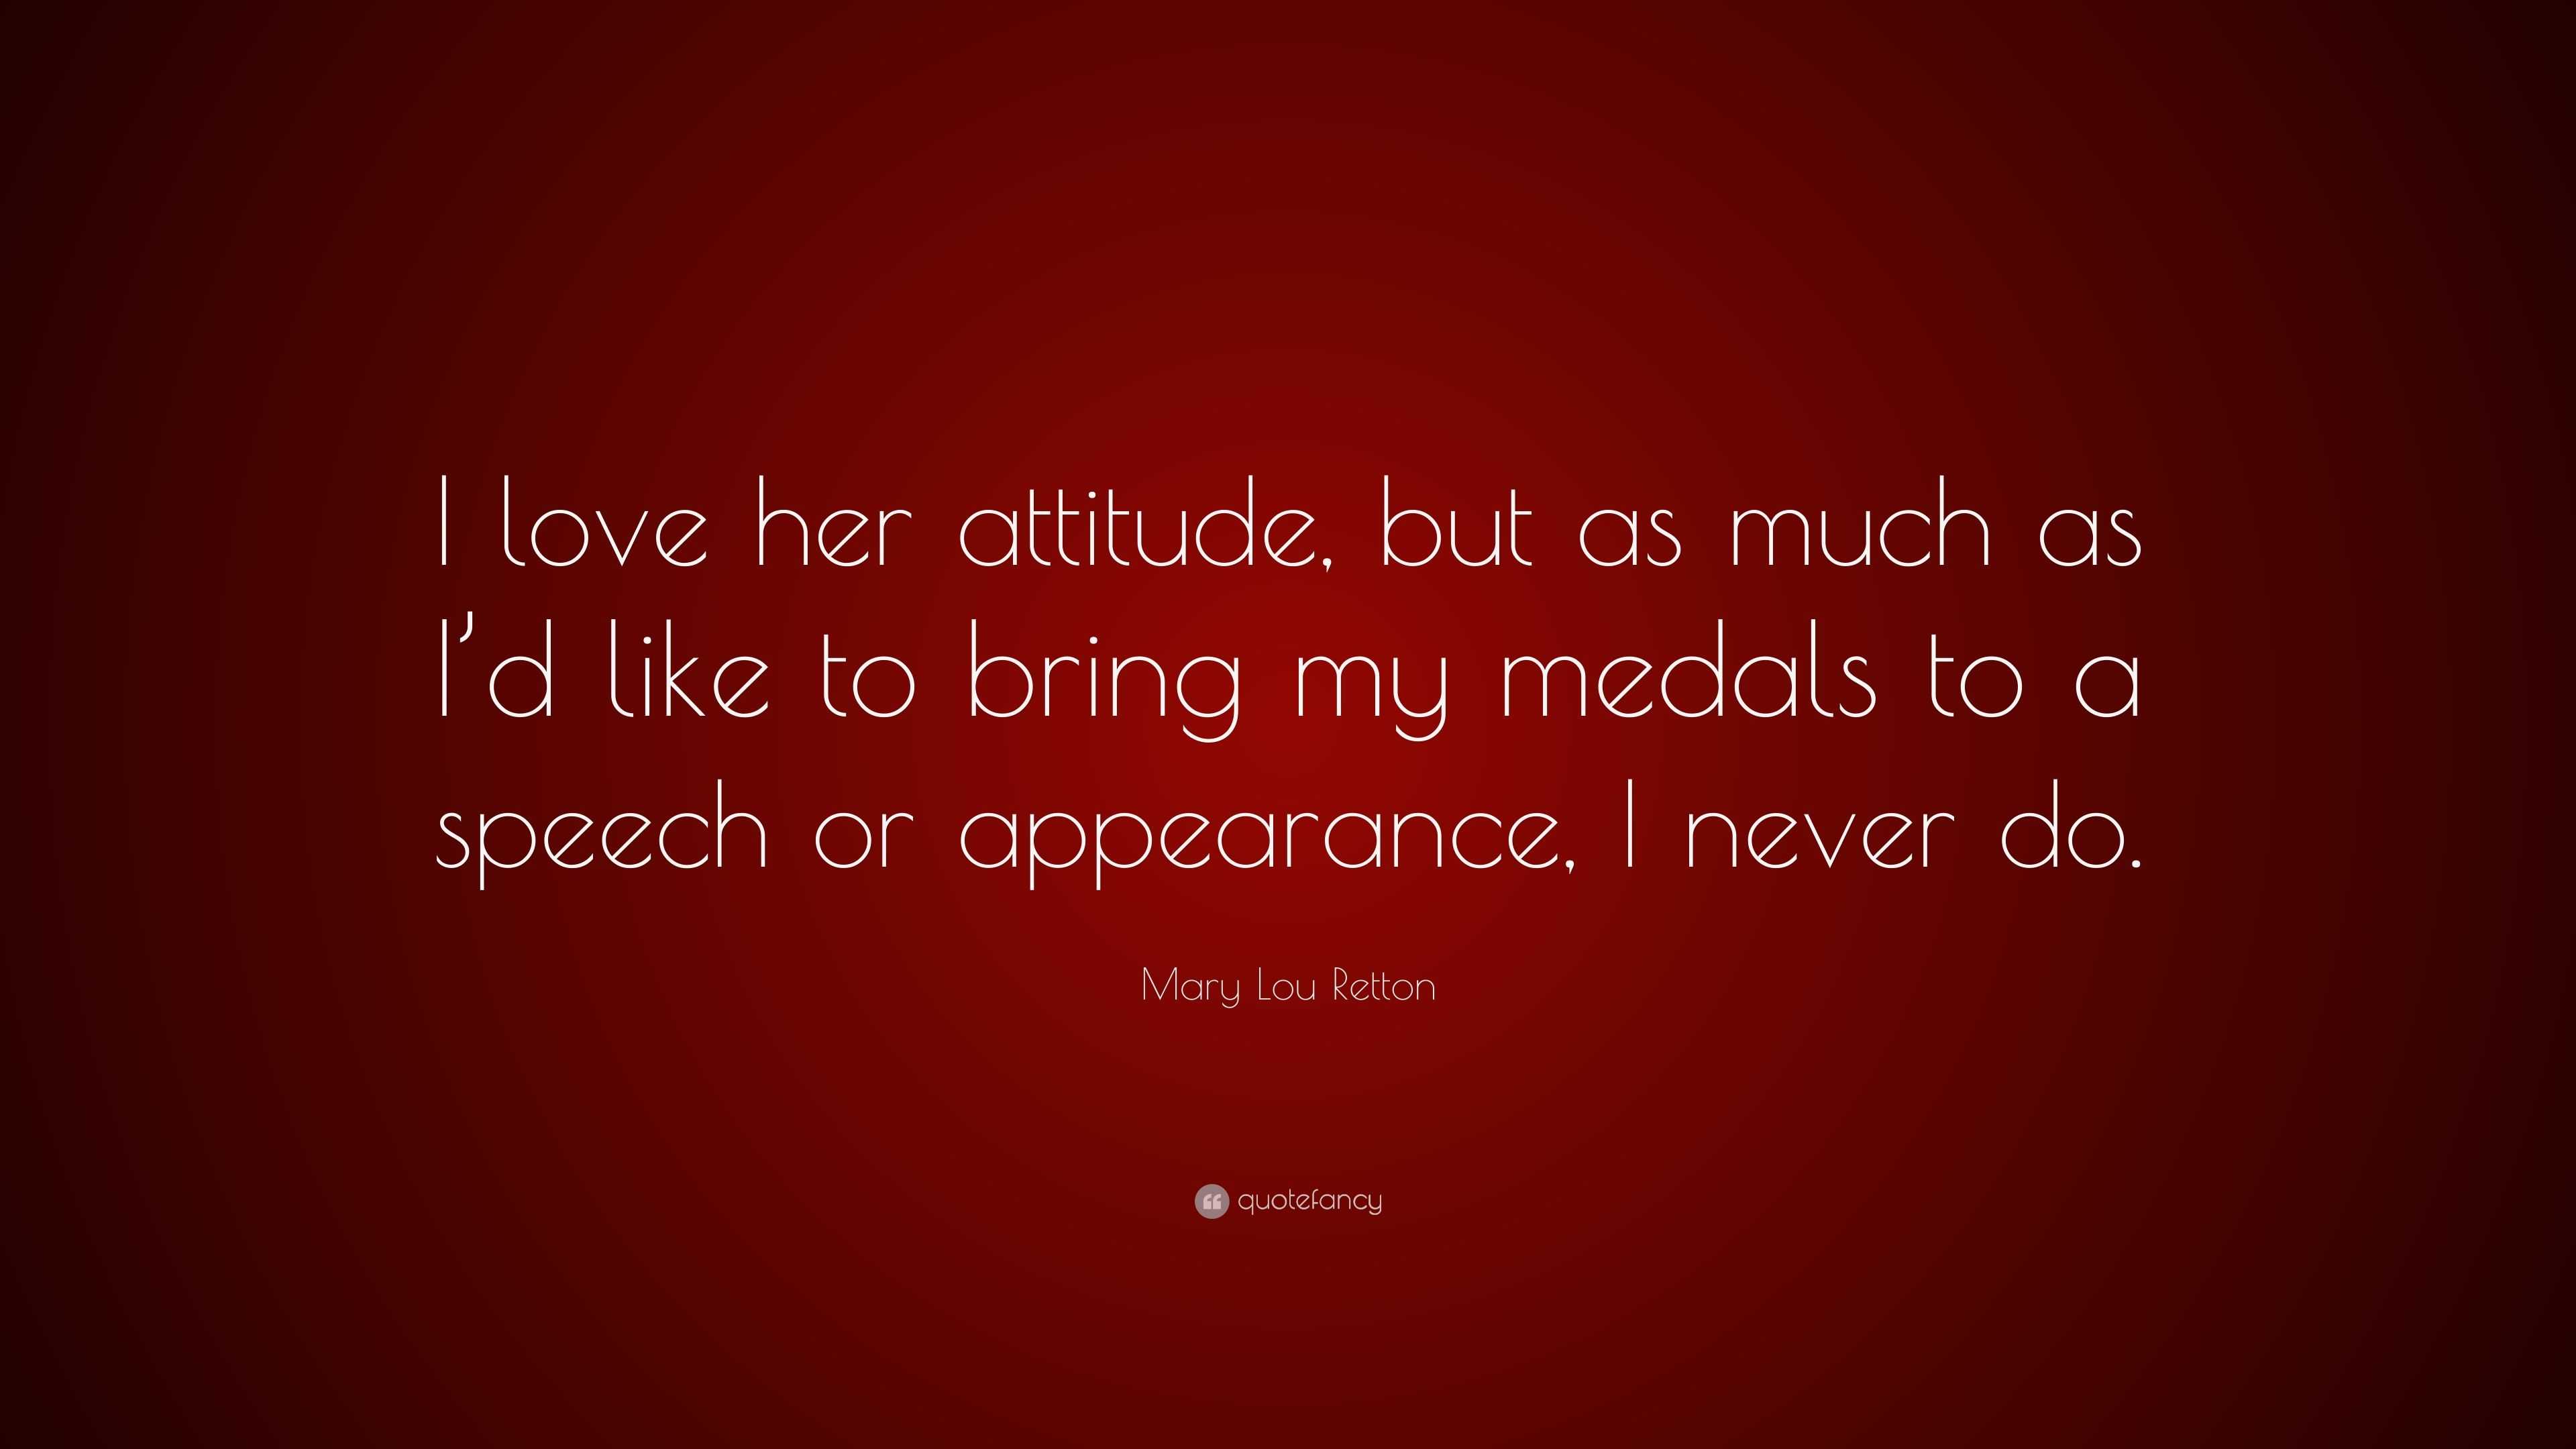 Mary Lou Retton Quote “I love her attitude but as much as I